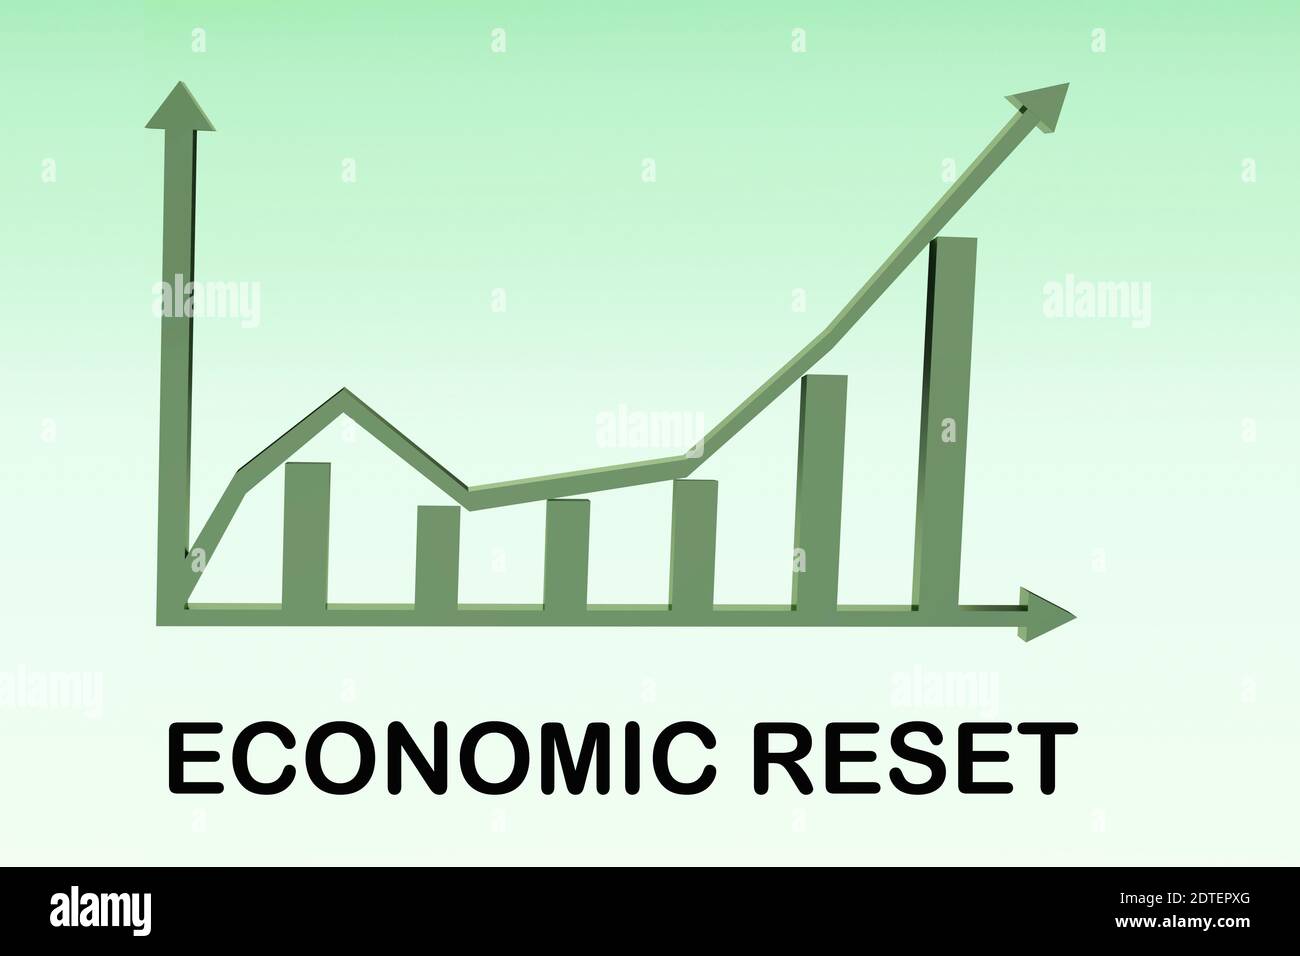 3D illustration of ECONOMIC RESET title above a column bar graph, isolated over green gradient as background. Stock Photo